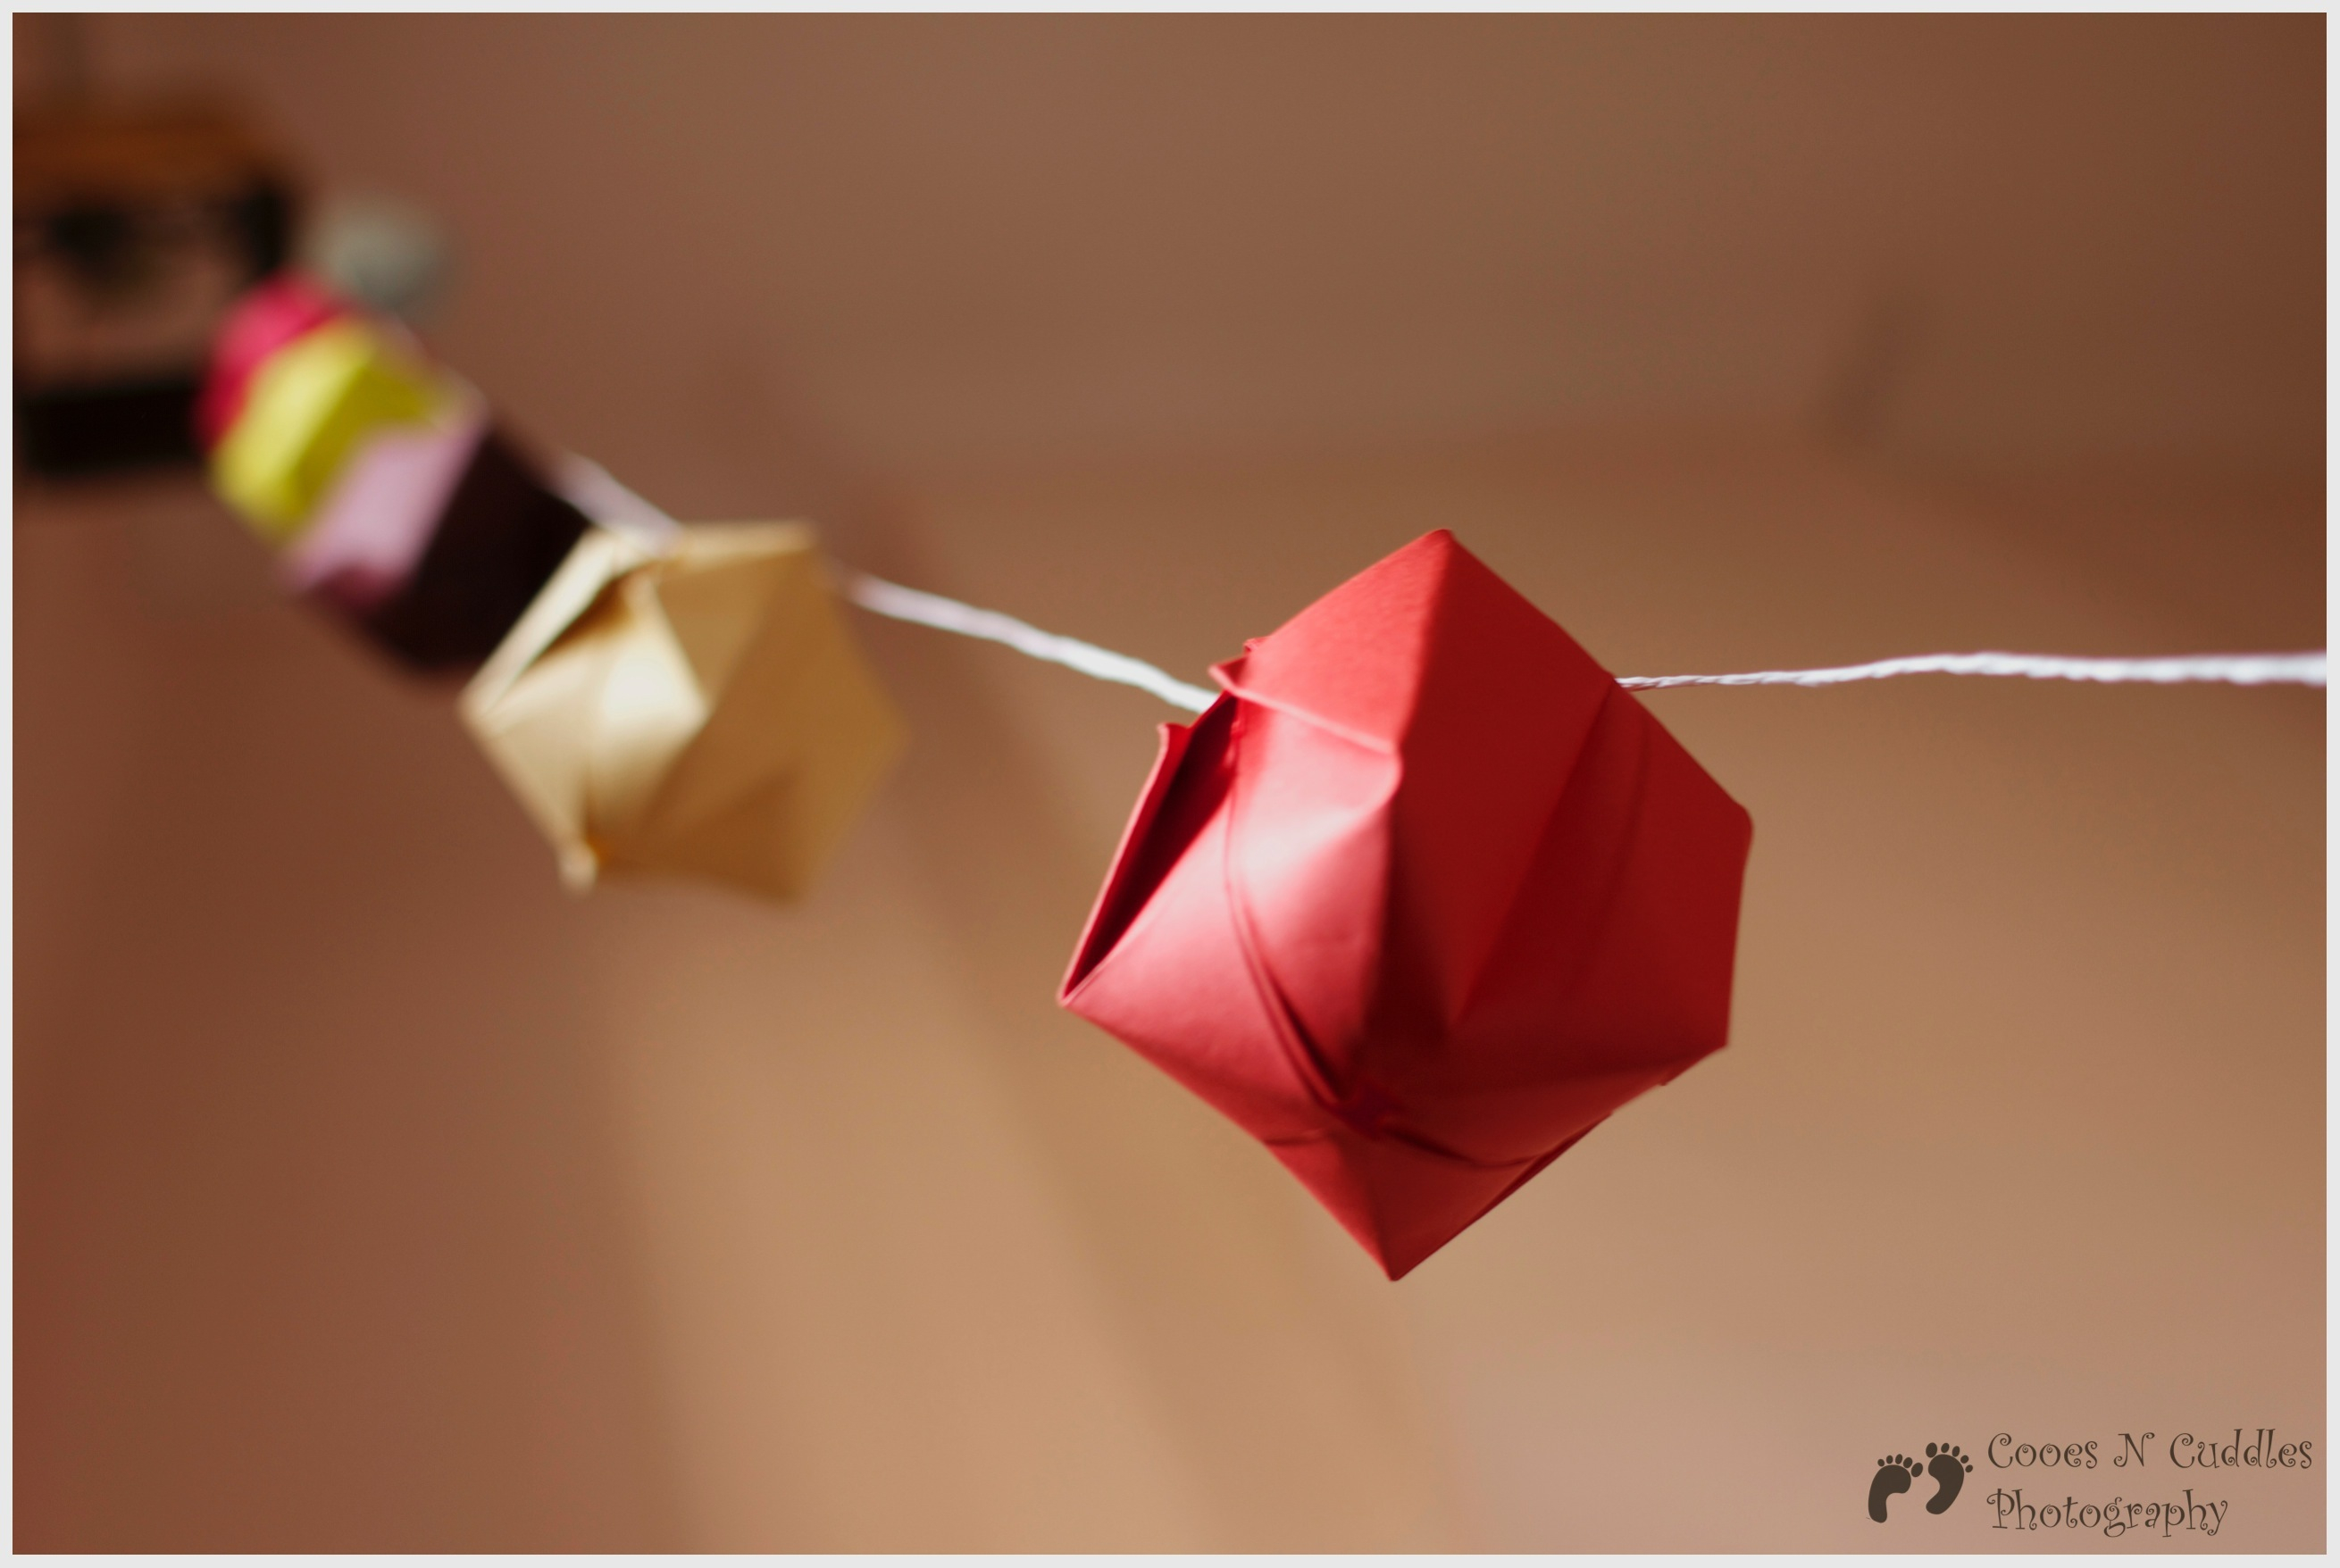 How To Make Origami Ball I Love Crafts Diy Origami Ball Bunting Cooes N Cuddles Photography